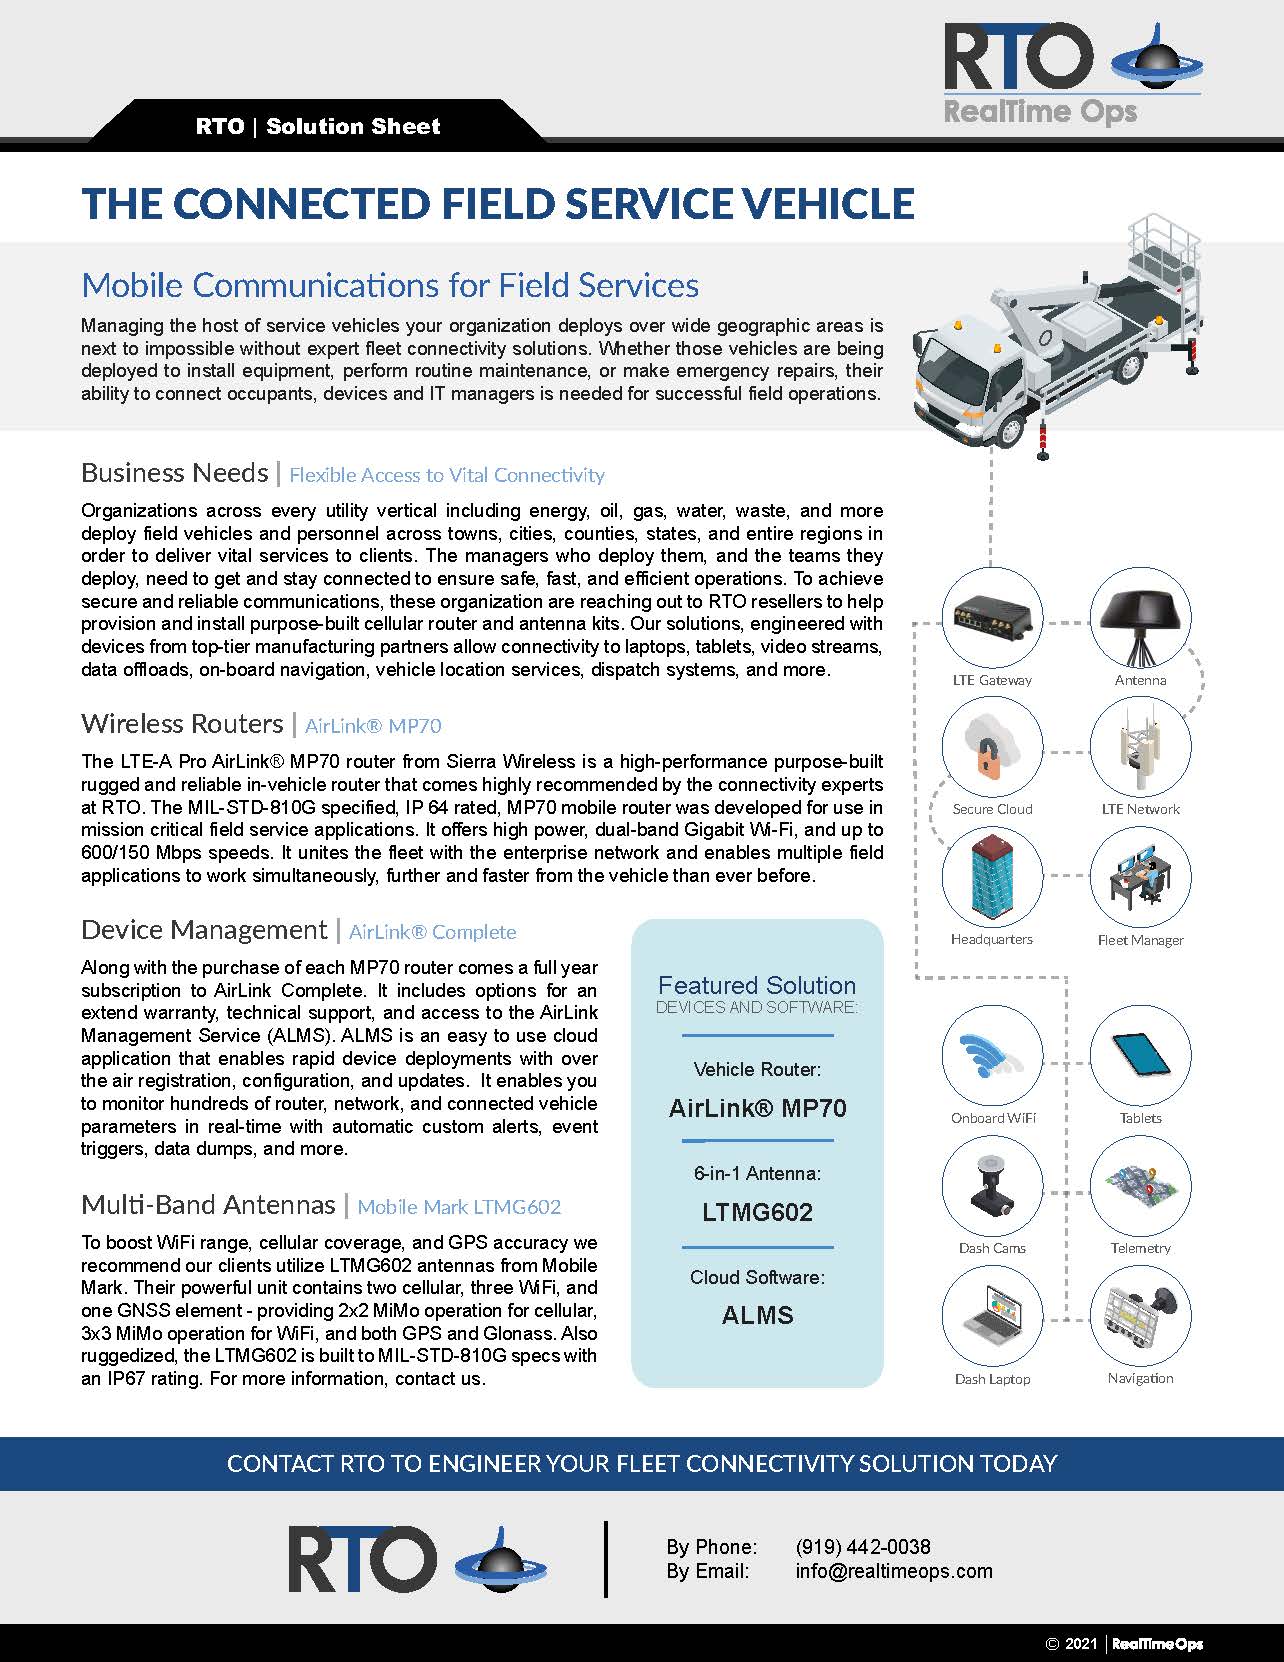 Mobile Communications for Field Services